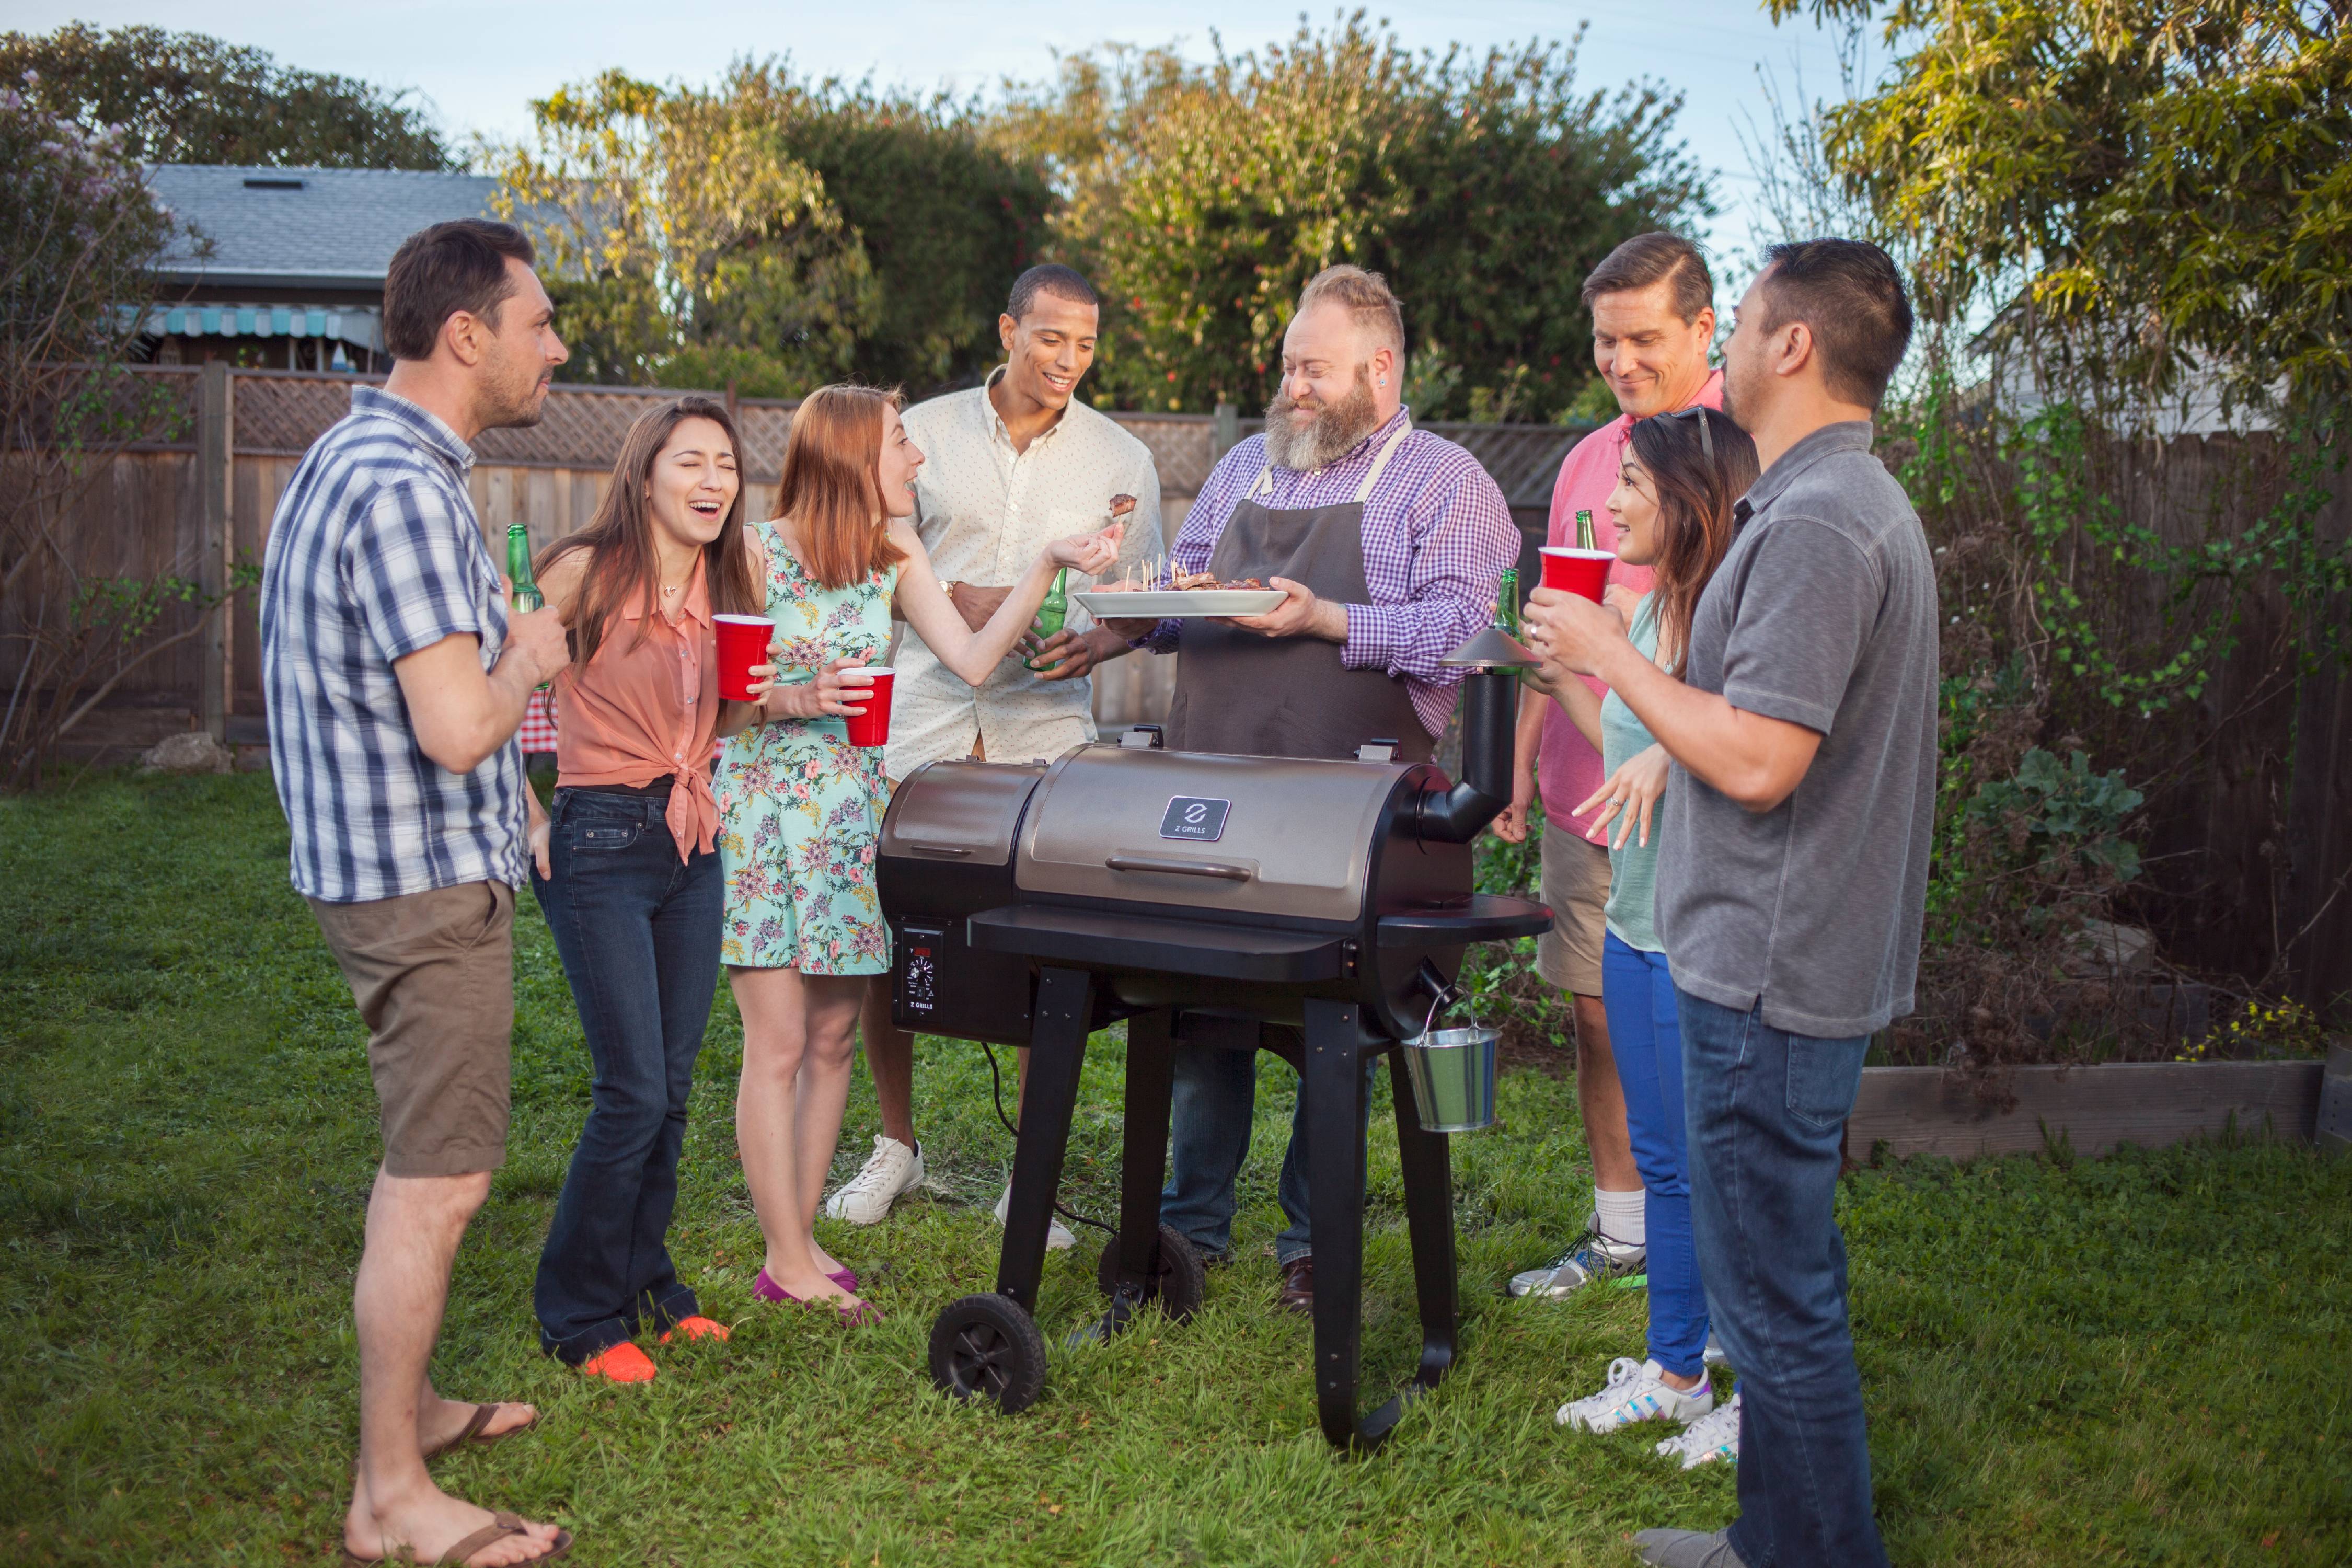 Z GRILLS Wood Pellet BBQ Grill and Smoker with Digital Temperature Controls and Free Patio Cover - image 2 of 10